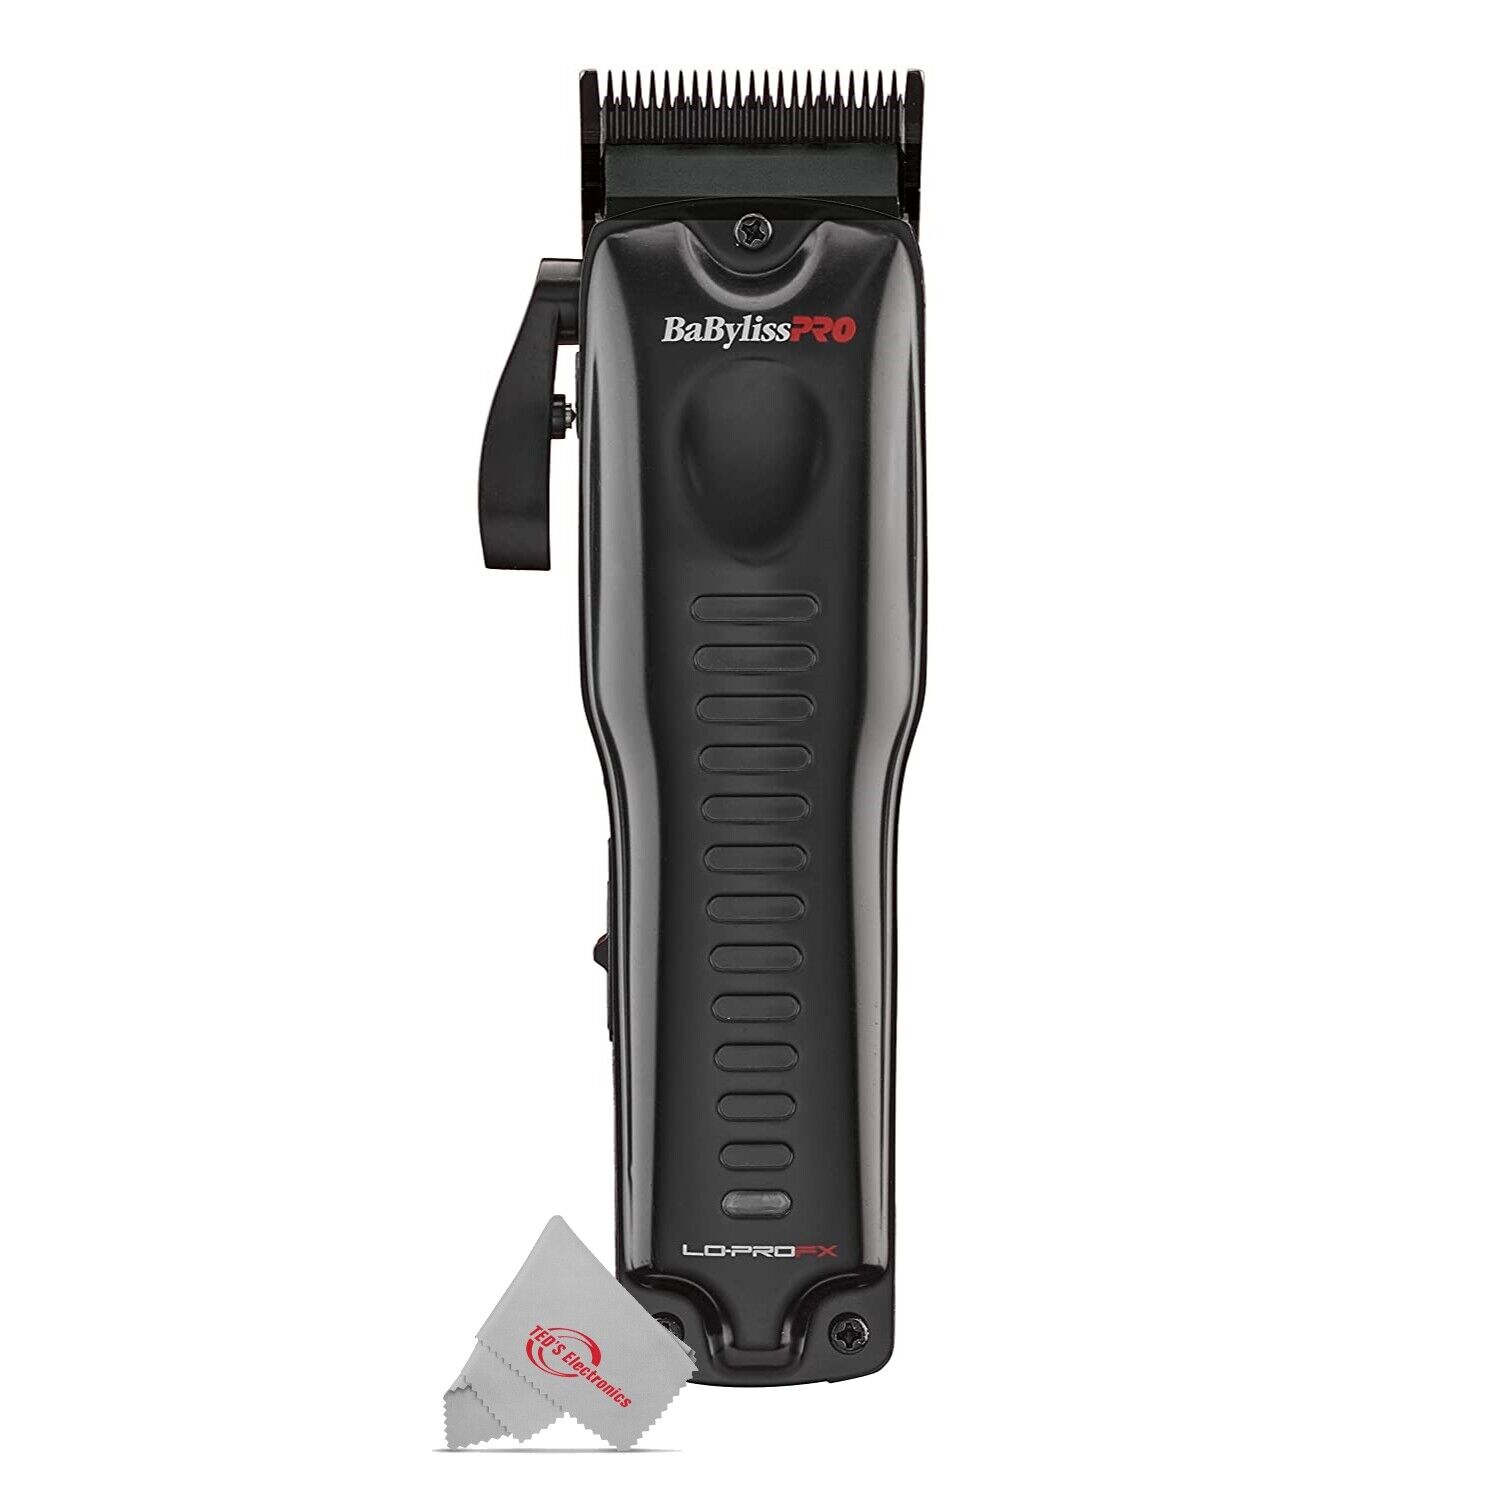 BaBylissPRO LO-PROFX Collection Clipper - Black for sale online | eBay